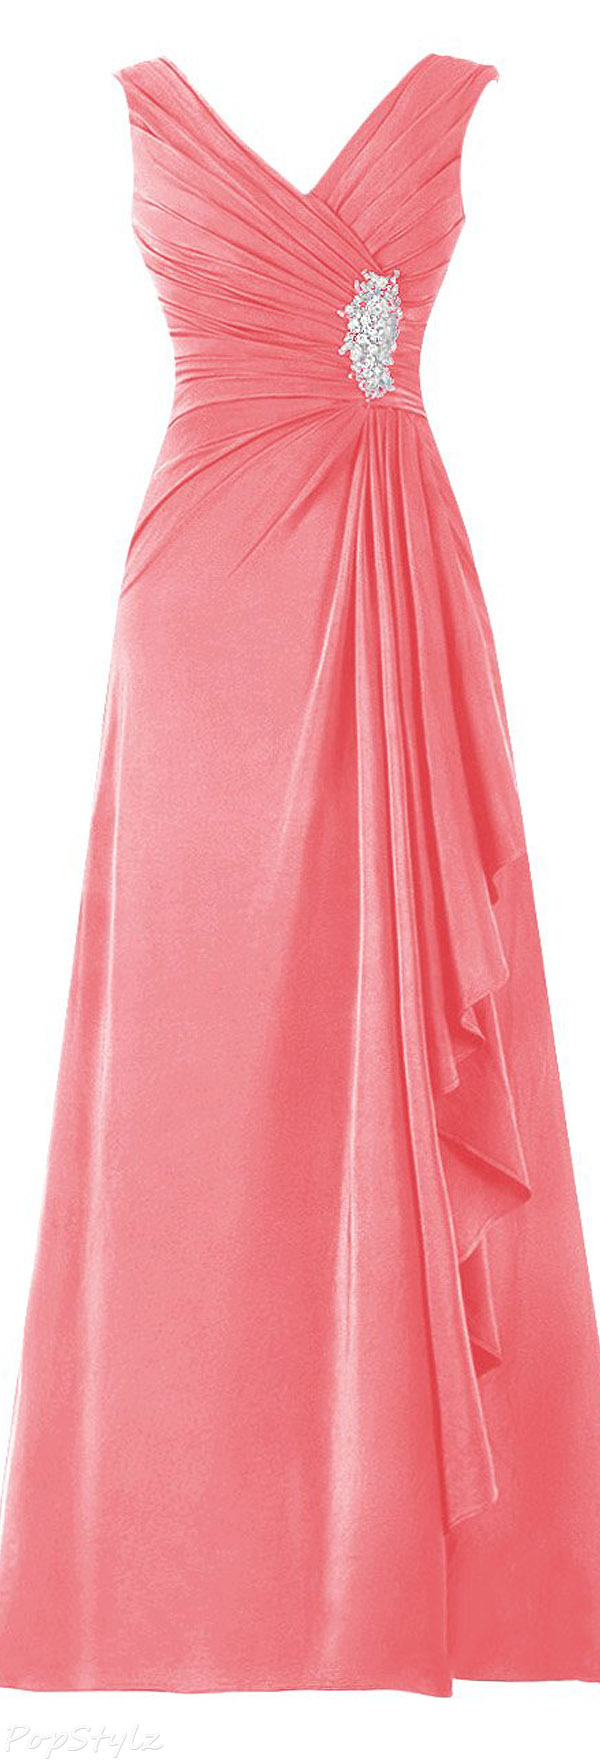 Diyouth Long Pleated Ruffles Evening Gown